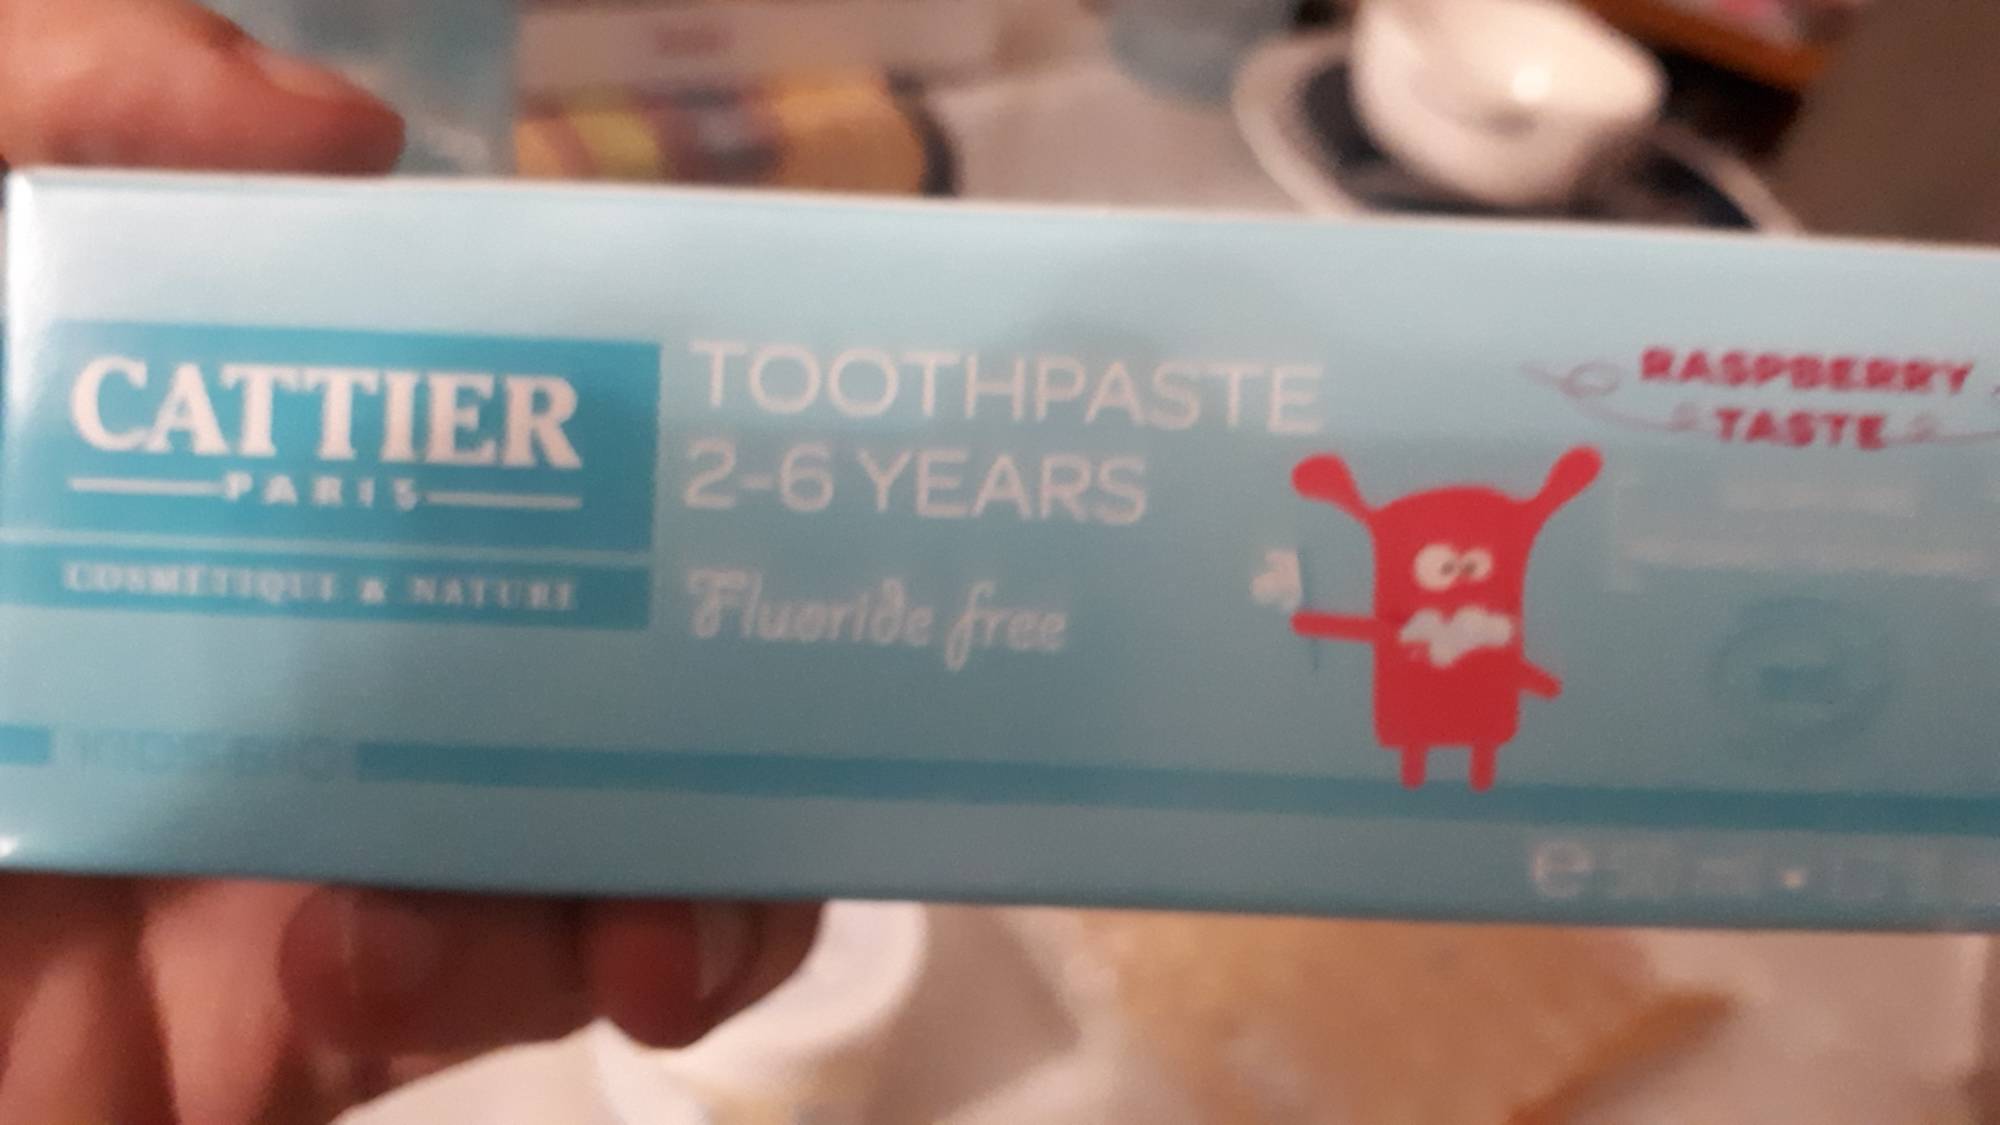 CATTIER - Cosmétique & nature - Toothpaste 2-6 years 